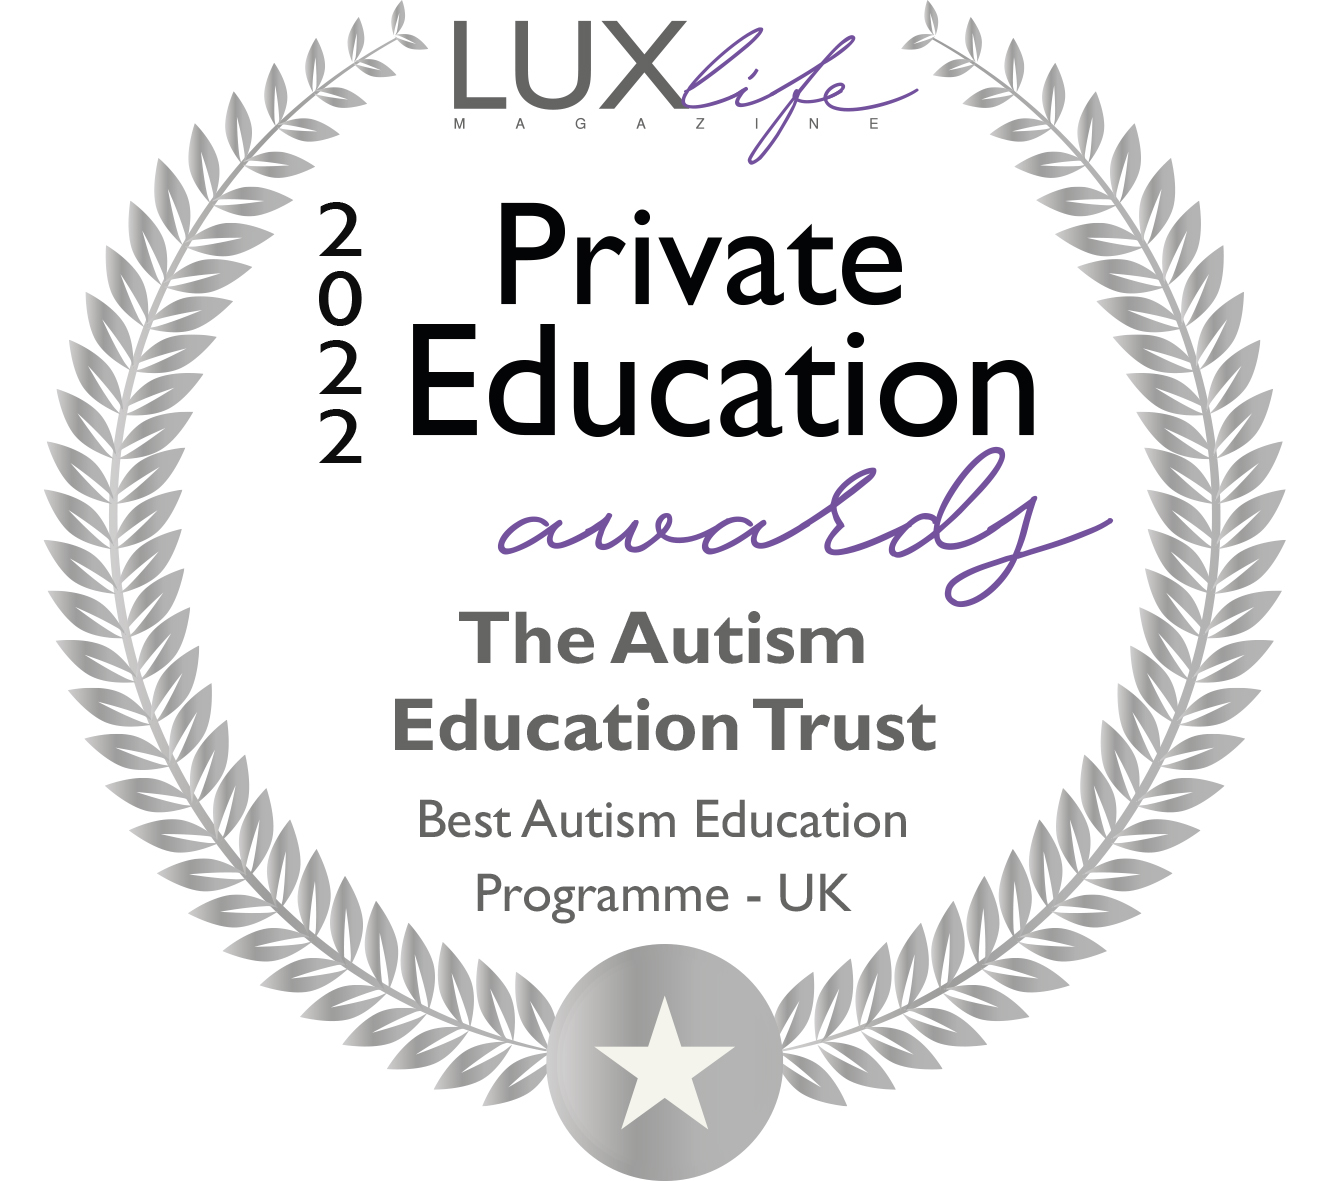 The Autism Education Trust - 2022 LUX Private Education Award Winners Logo